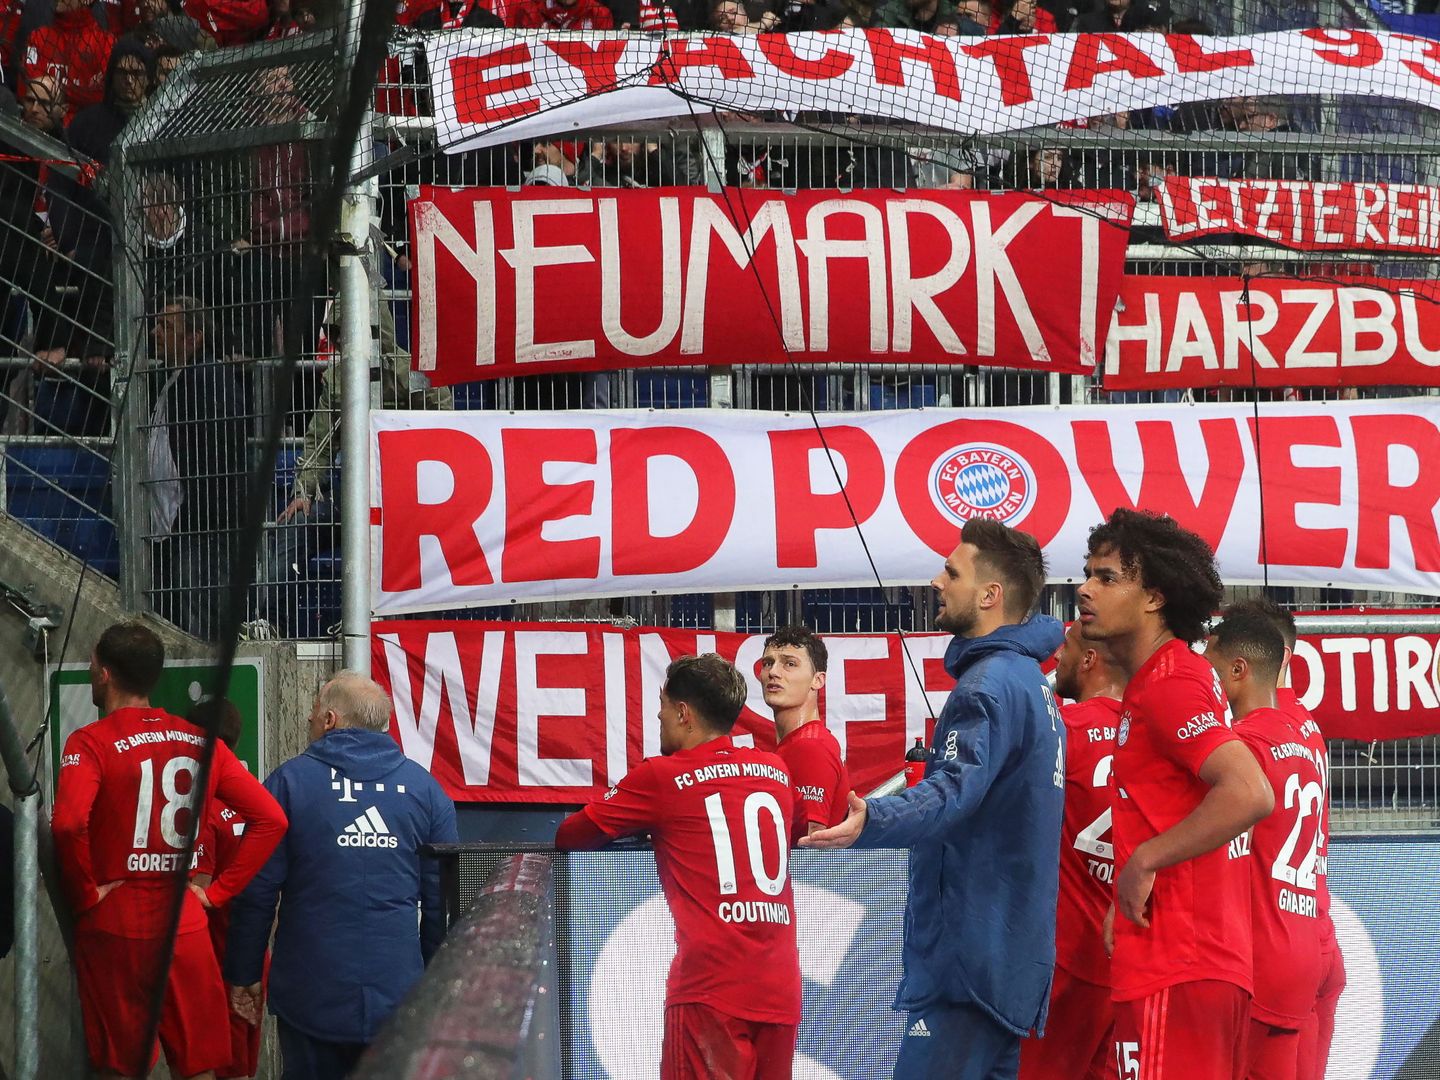 Sinsheim (Germany), 29 02 2020.- Bayern Munich players argue with fans during the German Bundesliga soccer match between TSG 1899 Hoffenheim and Bayern Munich in Sinsheim, Germany, 29 February 2020. (Alemania) EFE EPA ARMANDO BABANI CONDITIONS - ATTENTION: The DFL regulations prohibit any use of photographs as image sequences and or quasi-video.